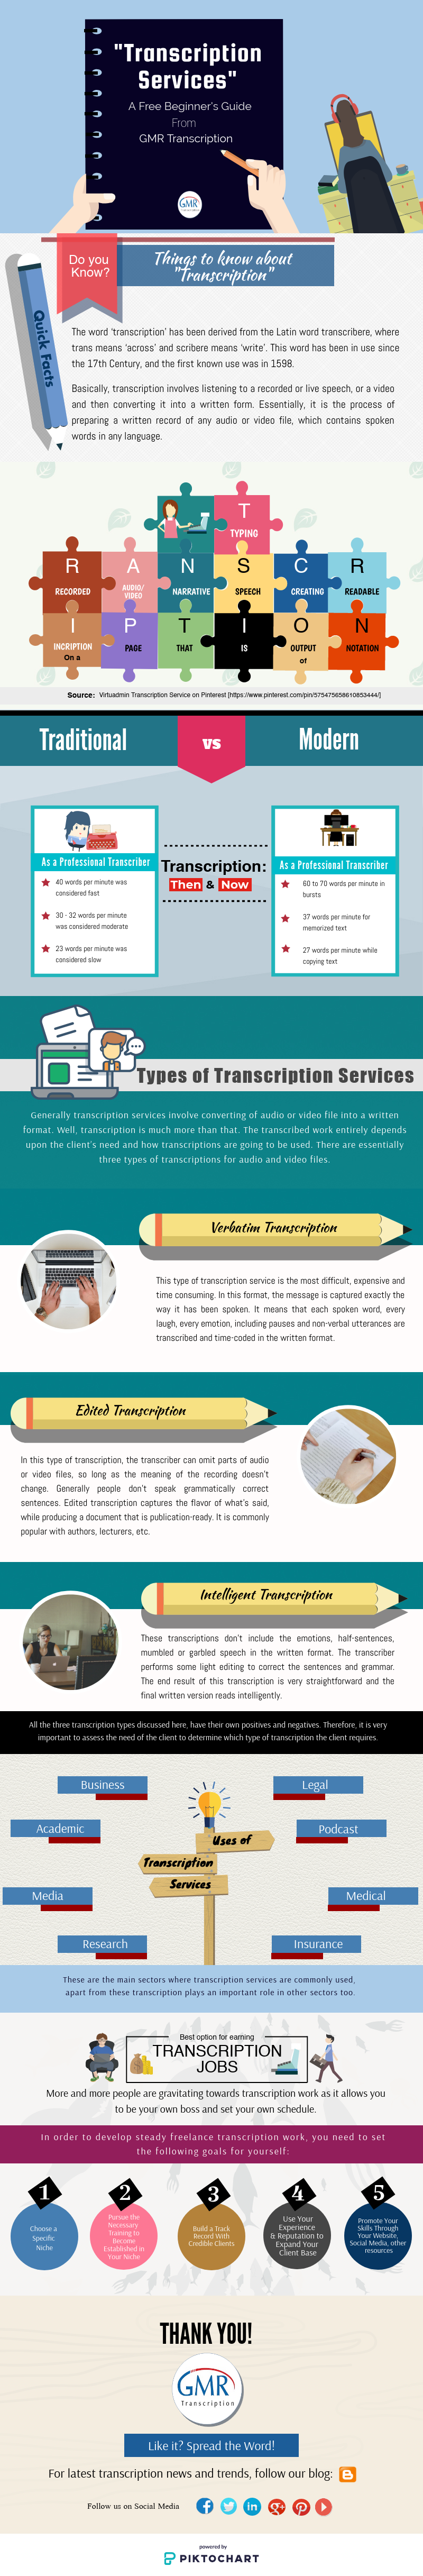 Transcription Services - A Free Beginner's Guide